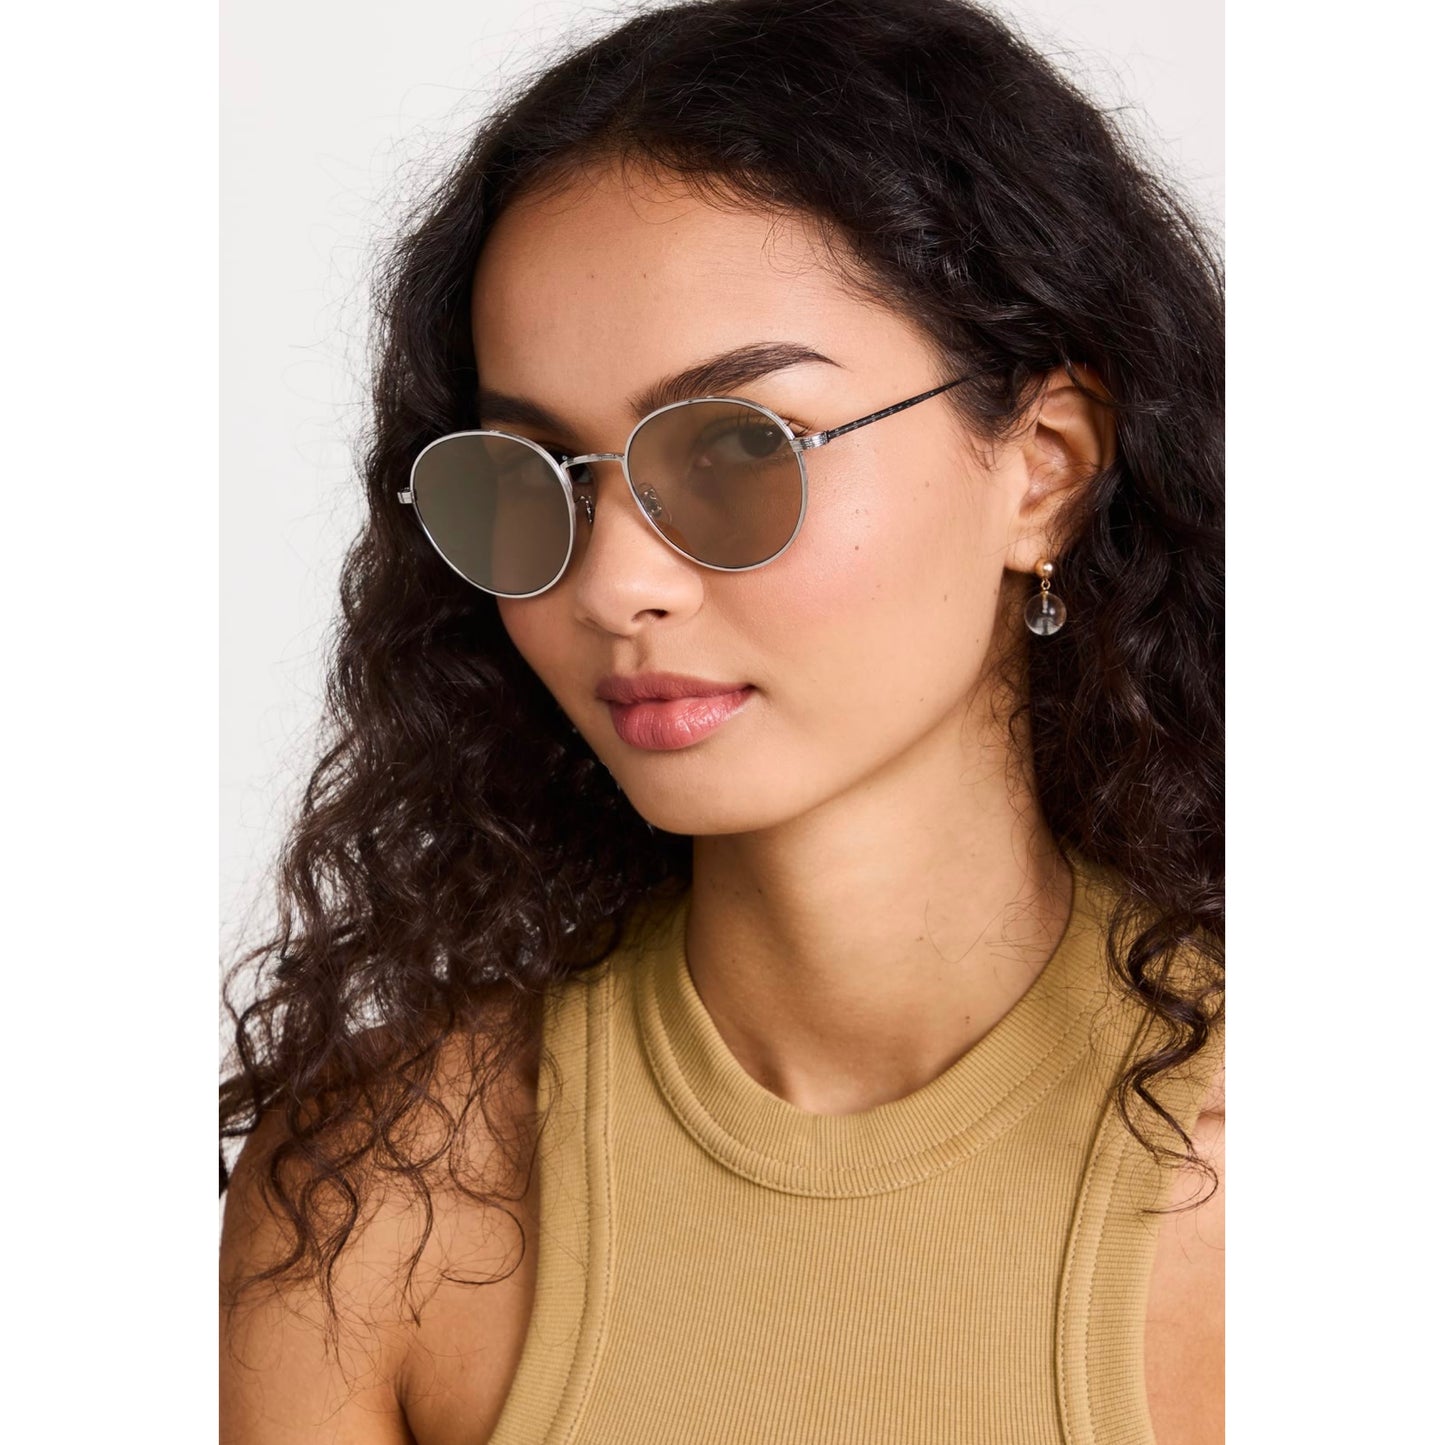 Oliver Peoples Altair Sunglasses